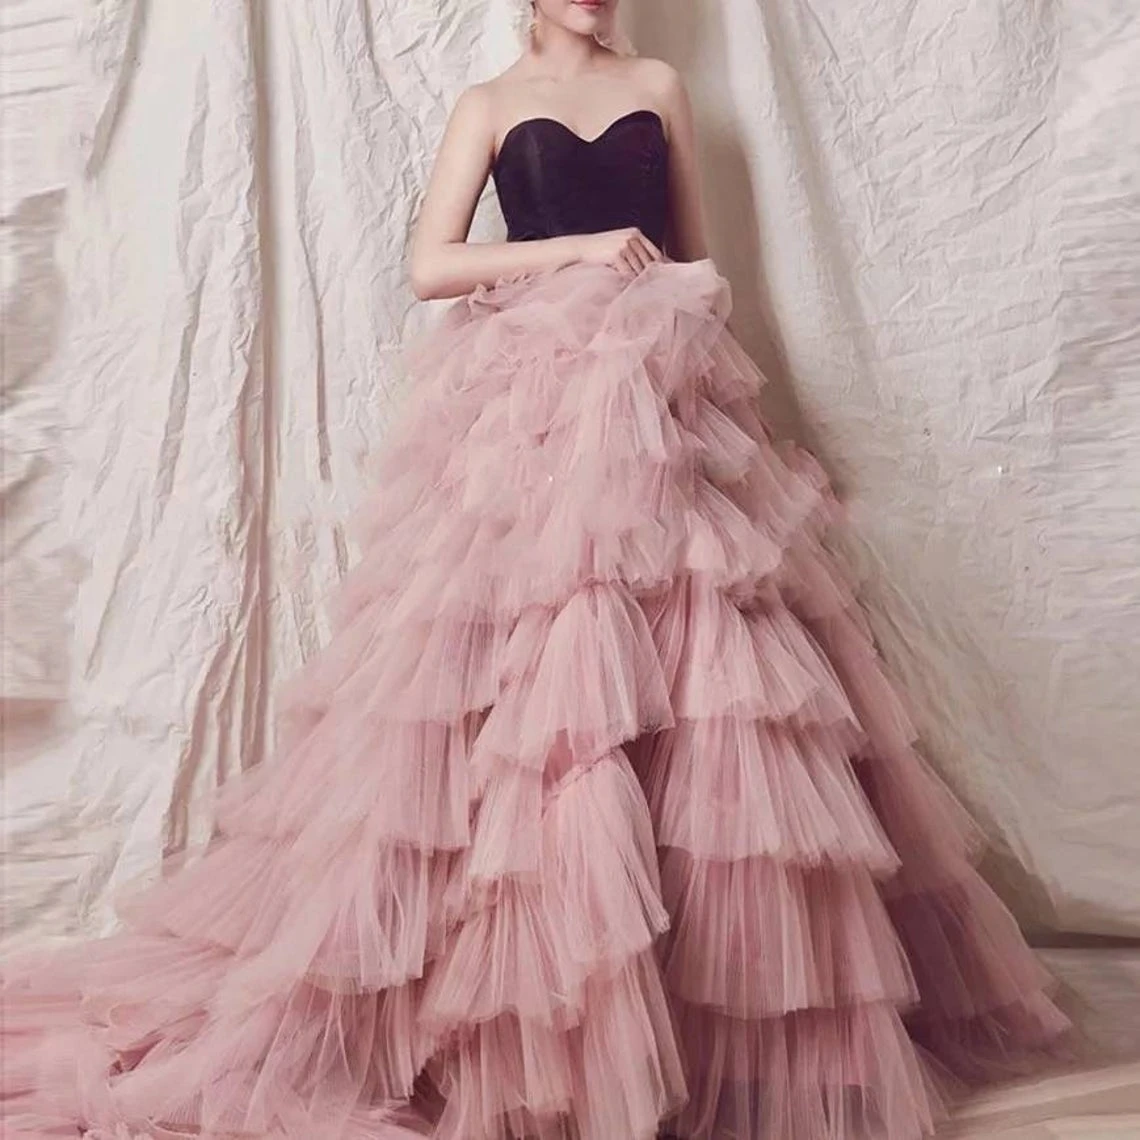 

Ruffle Tulle Prom Dress Layered Puffy Tulle Strapless Sweetheart High Waist Sweep Train Any Size Any Color Custom Evening Gown